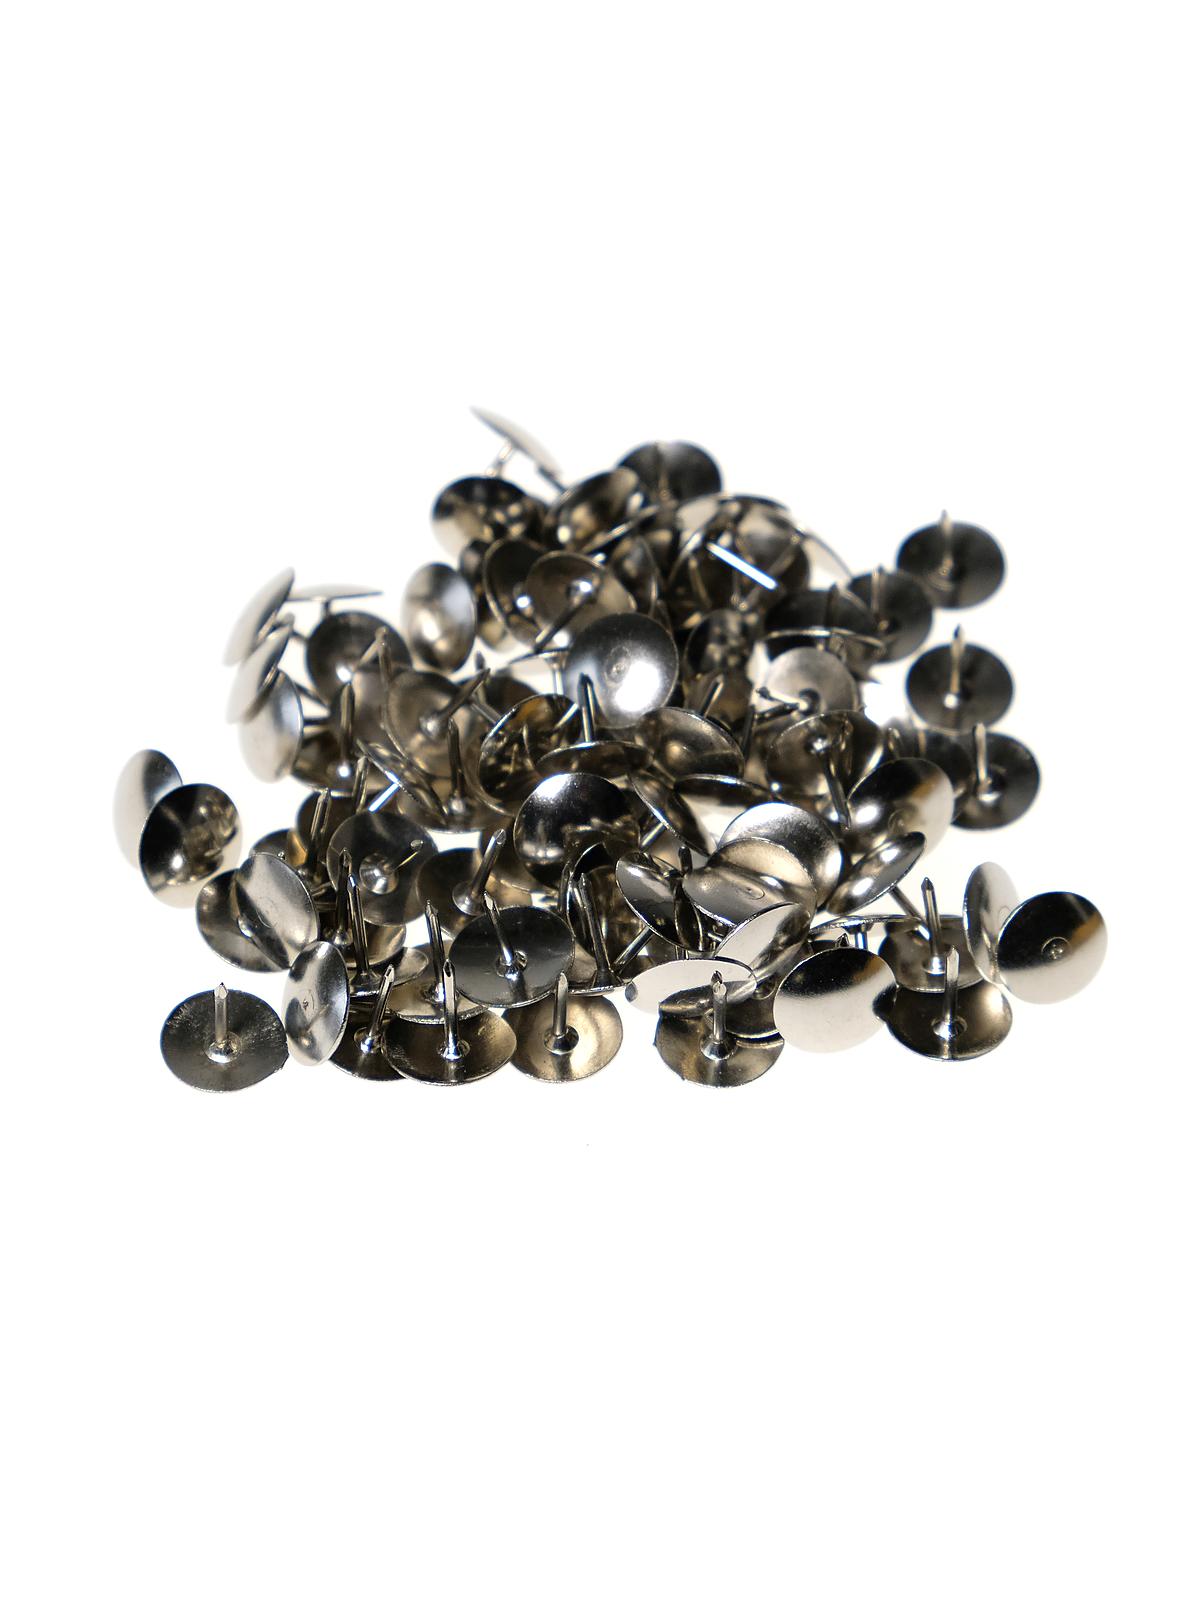 Thumb Tacks 1 2 In. Nickel Plated Pack Of 100